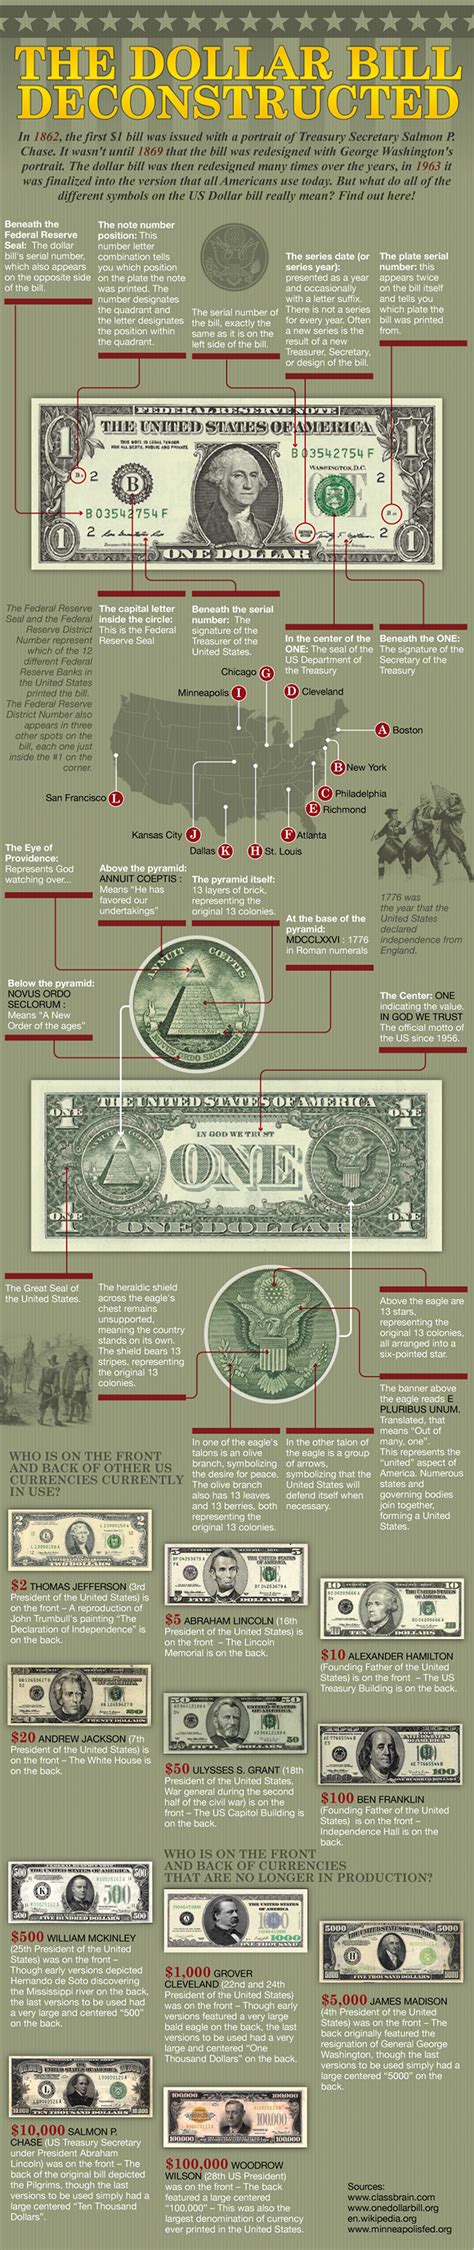 The Dollar Bill Deconstructed Know The Meaning Of All The Symbols On